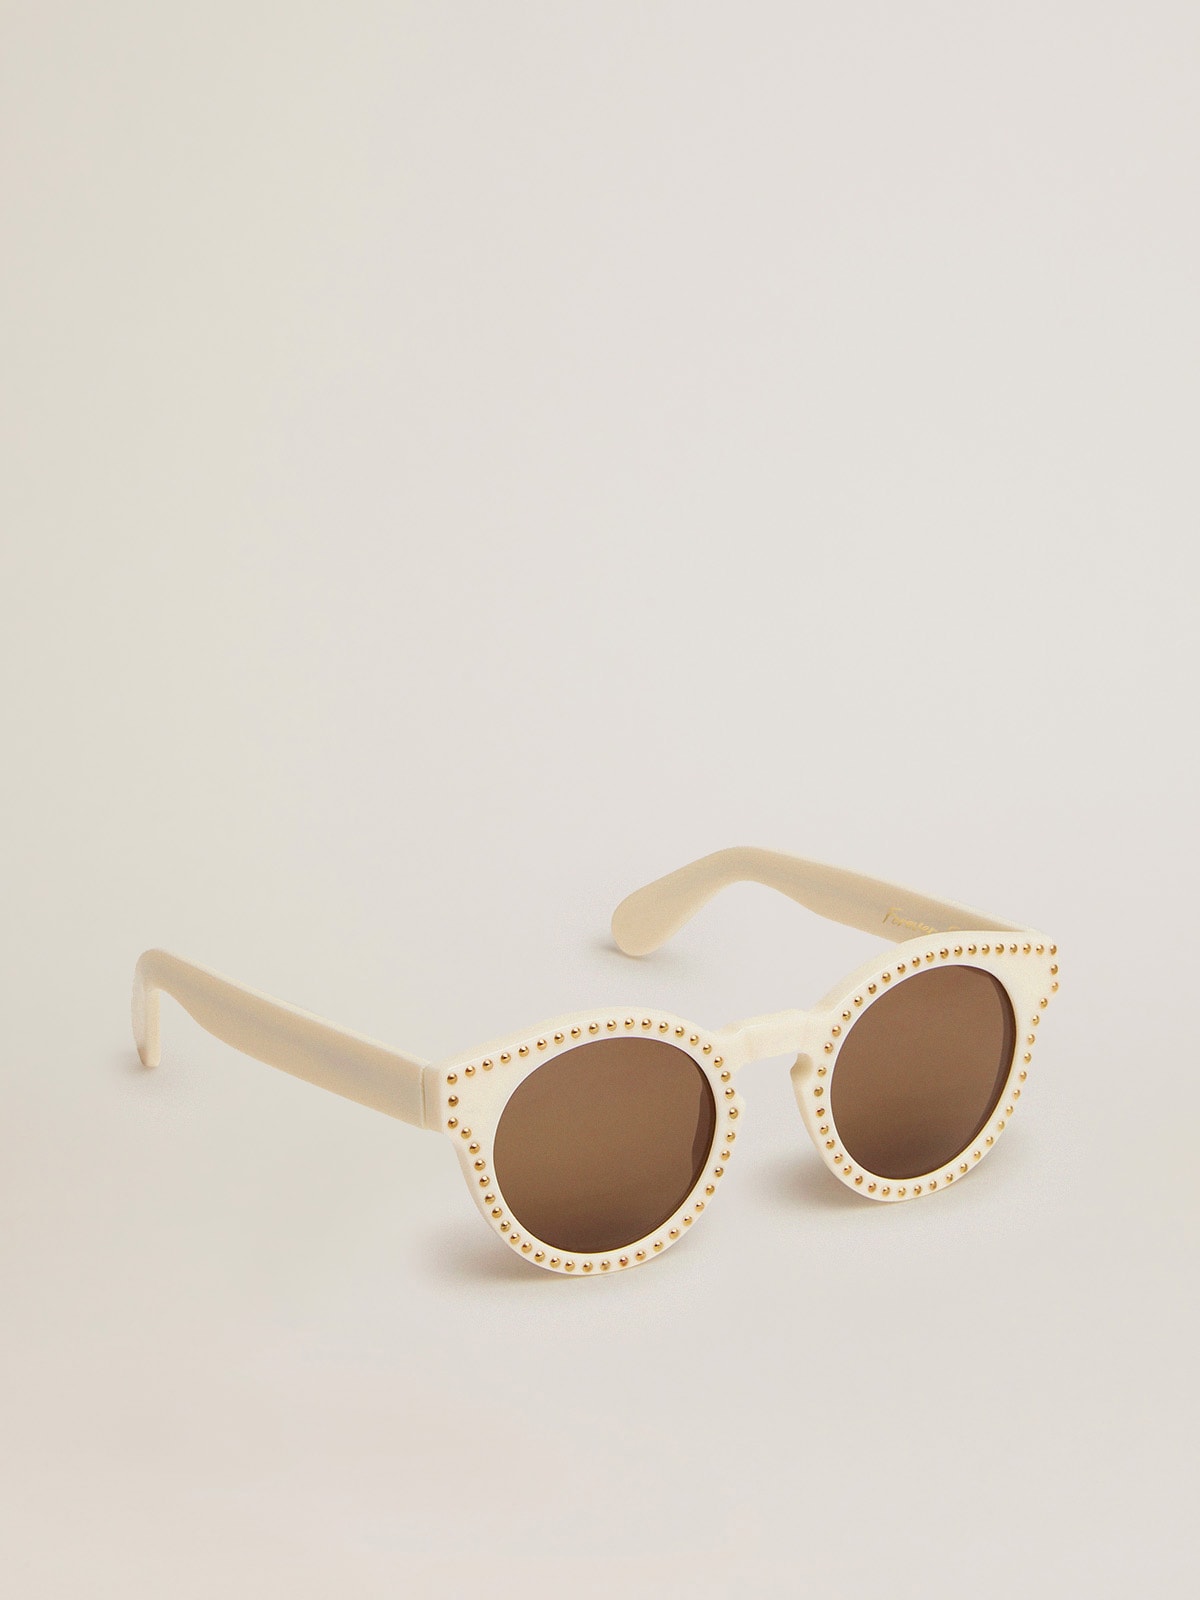 Golden Goose - Sunglasses Panthos model with white frame and gold studs in 